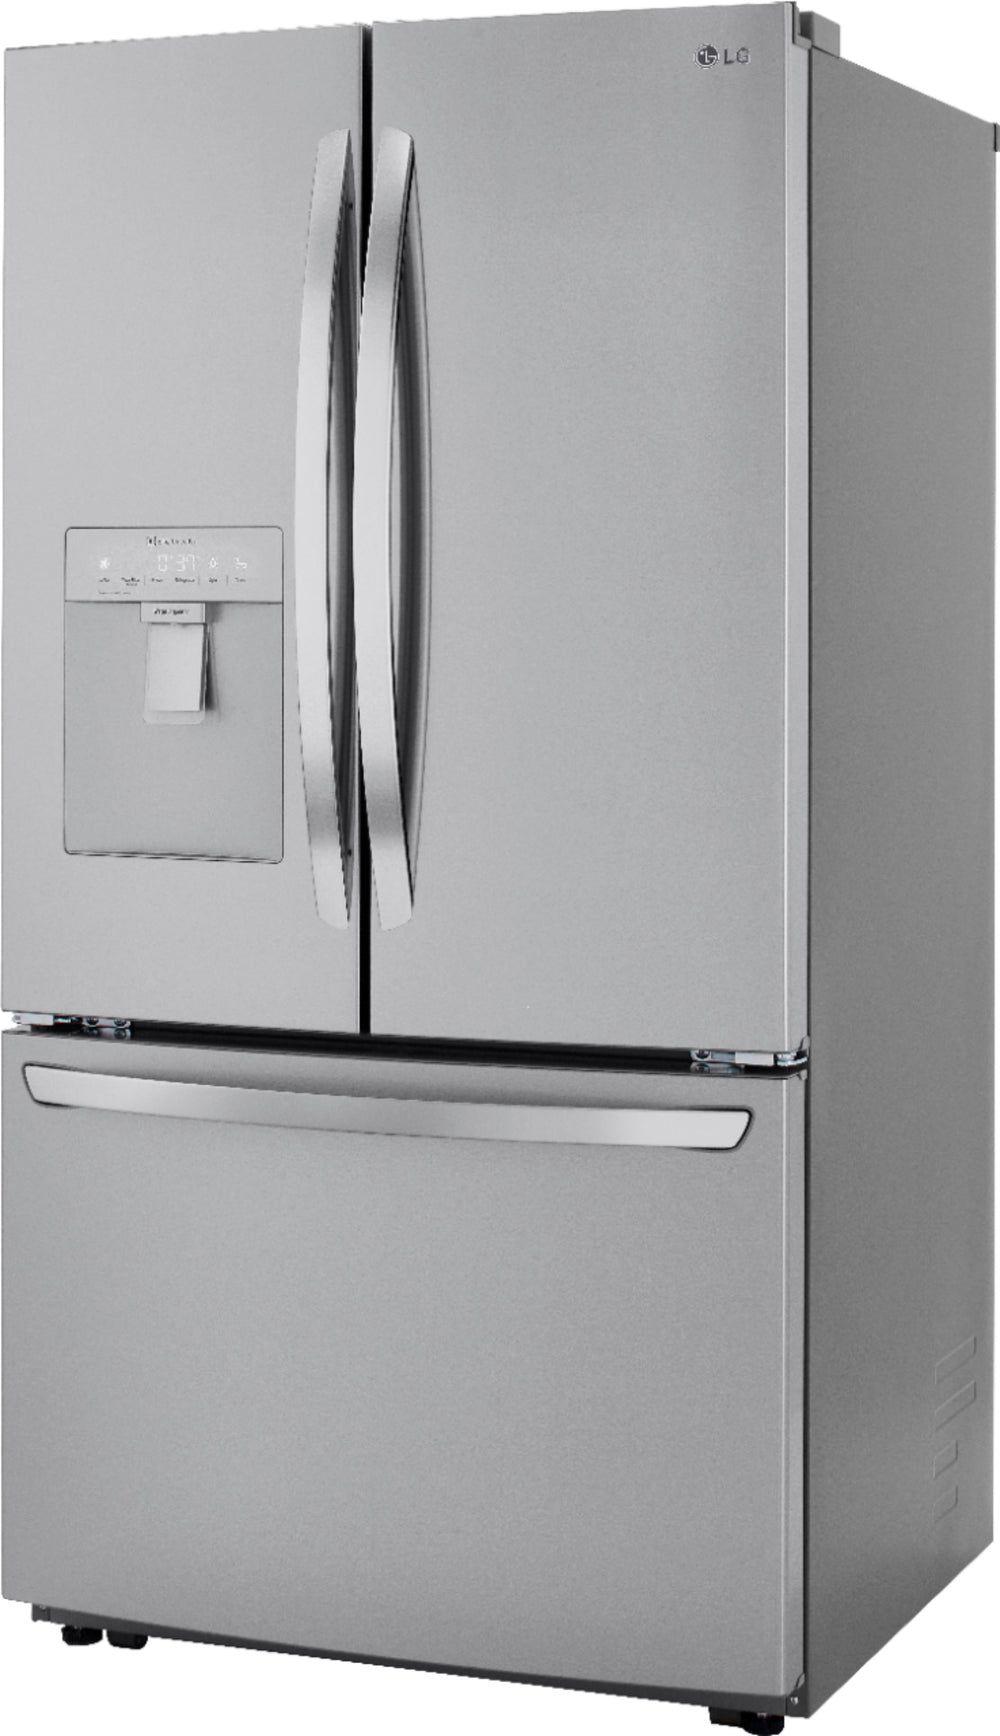 LG - 29 Cu. Ft. French Door Smart Refrigerator with Ice Maker and External Water Dispenser - Stainless steel_1